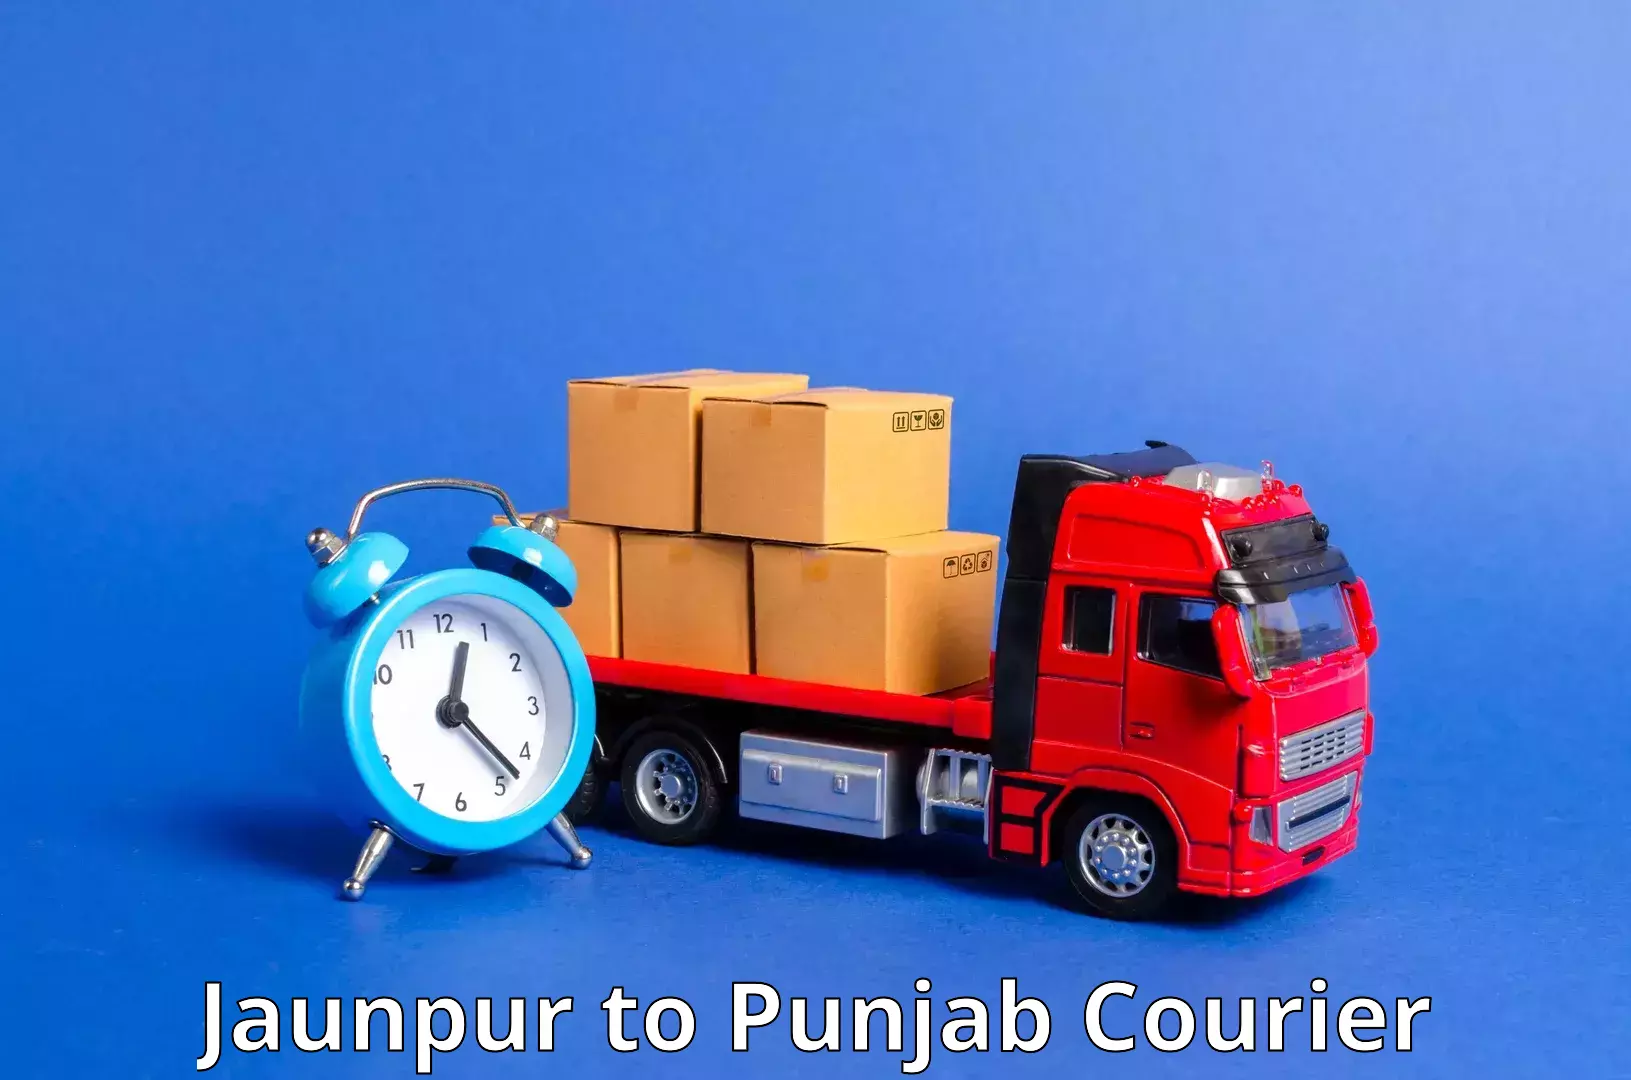 Local delivery service Jaunpur to Moga